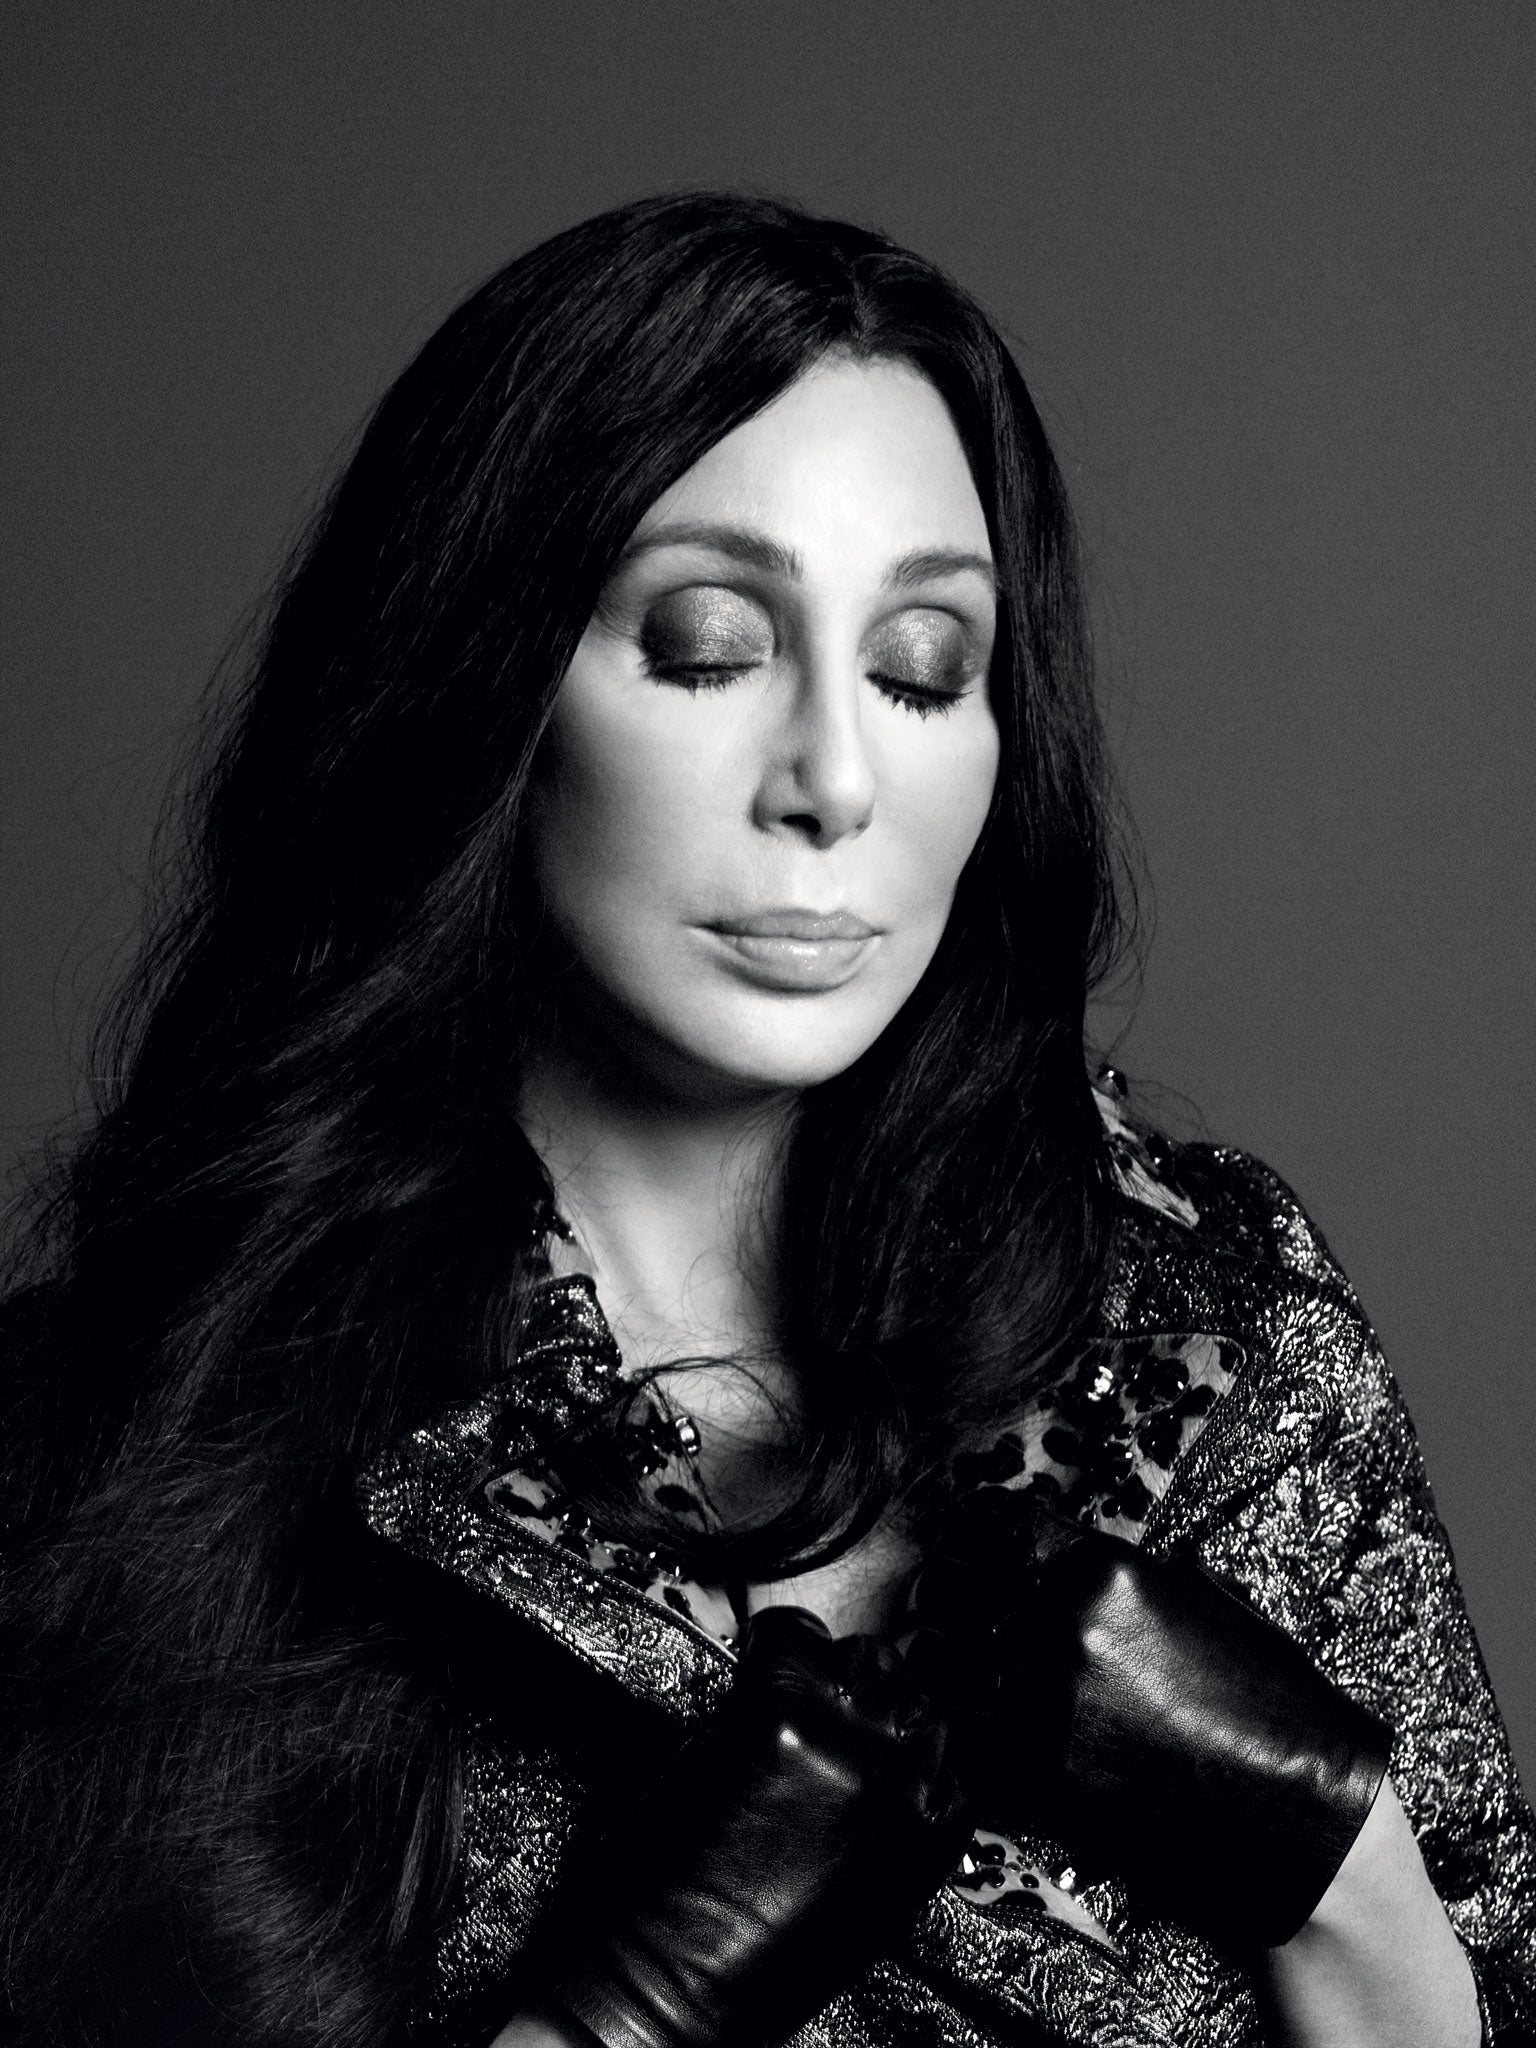 Turning back time: Cher in the cover-shoot for 'Love' magazine